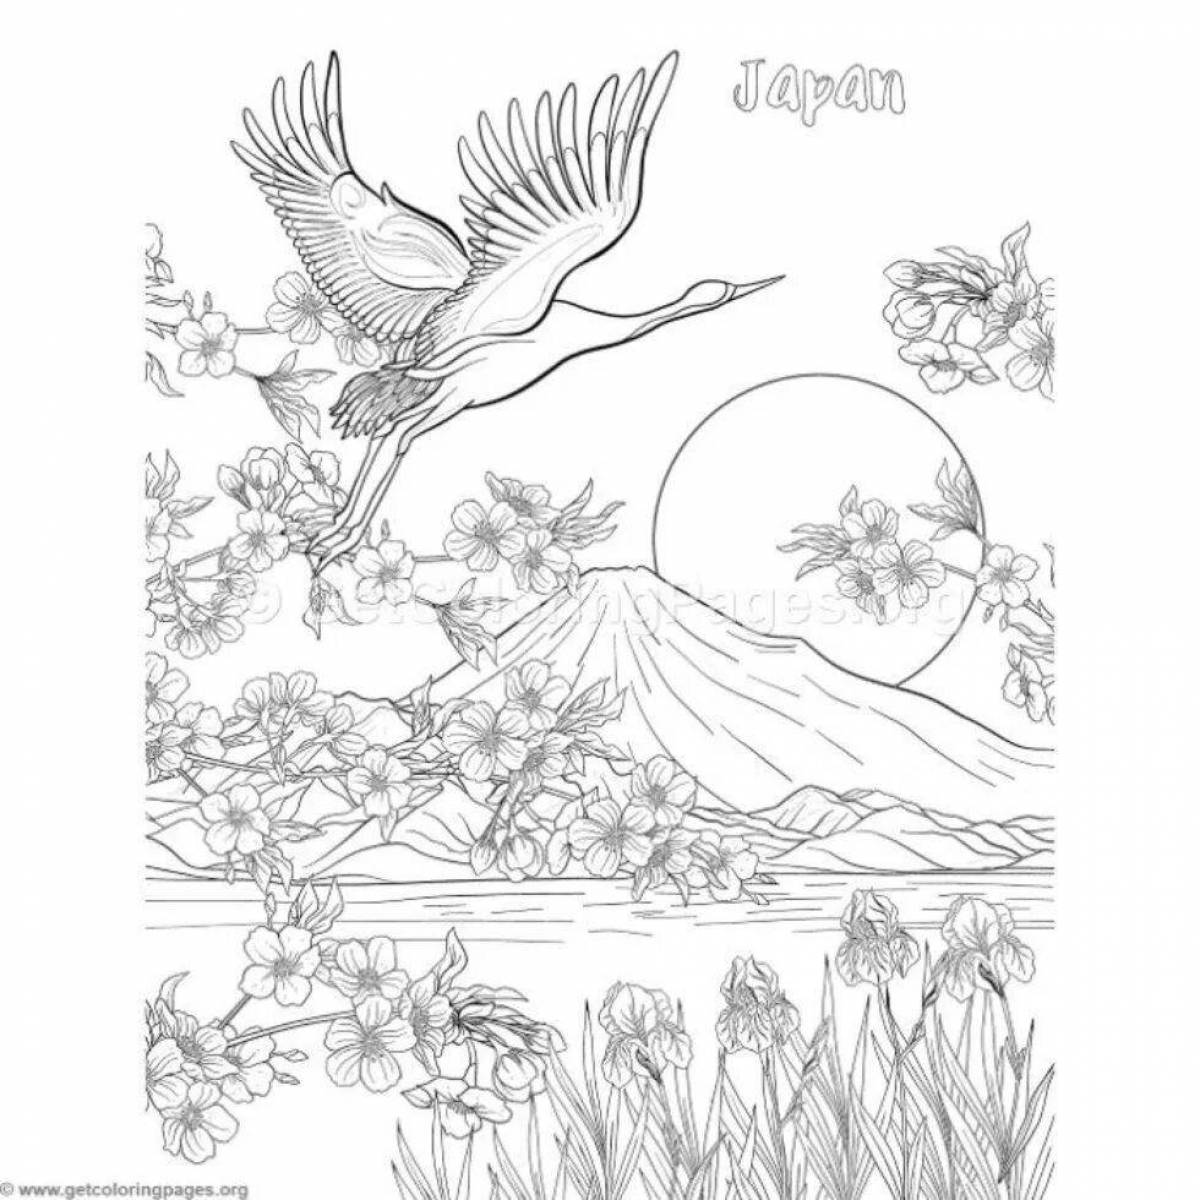 Great japanese landscape coloring page